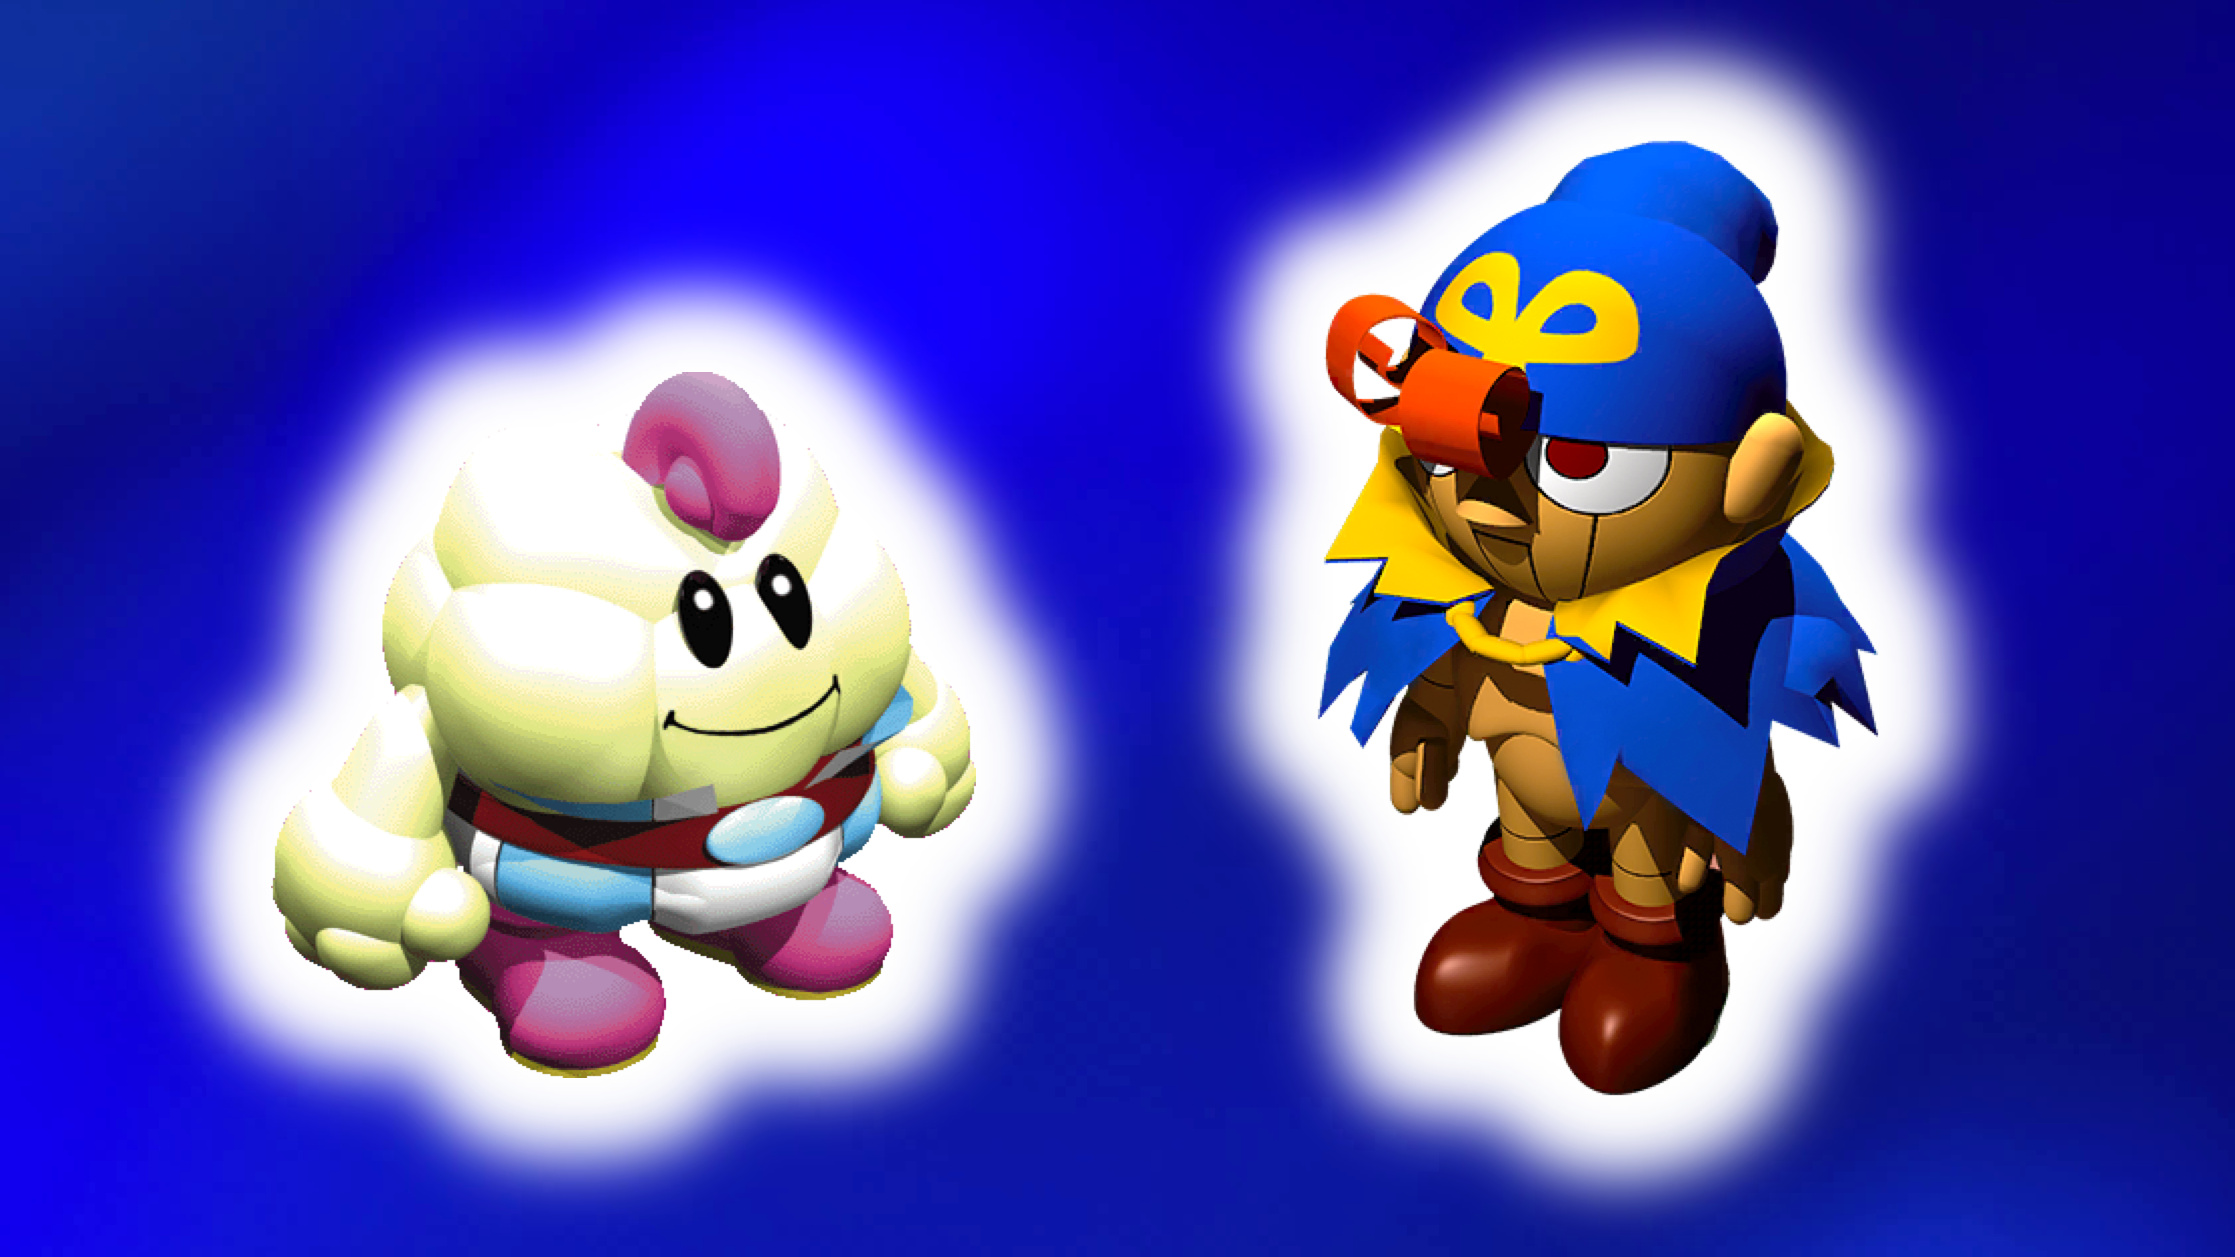 Paper Mario On The Nintendo 64 Has The Most Adorable Portraits For